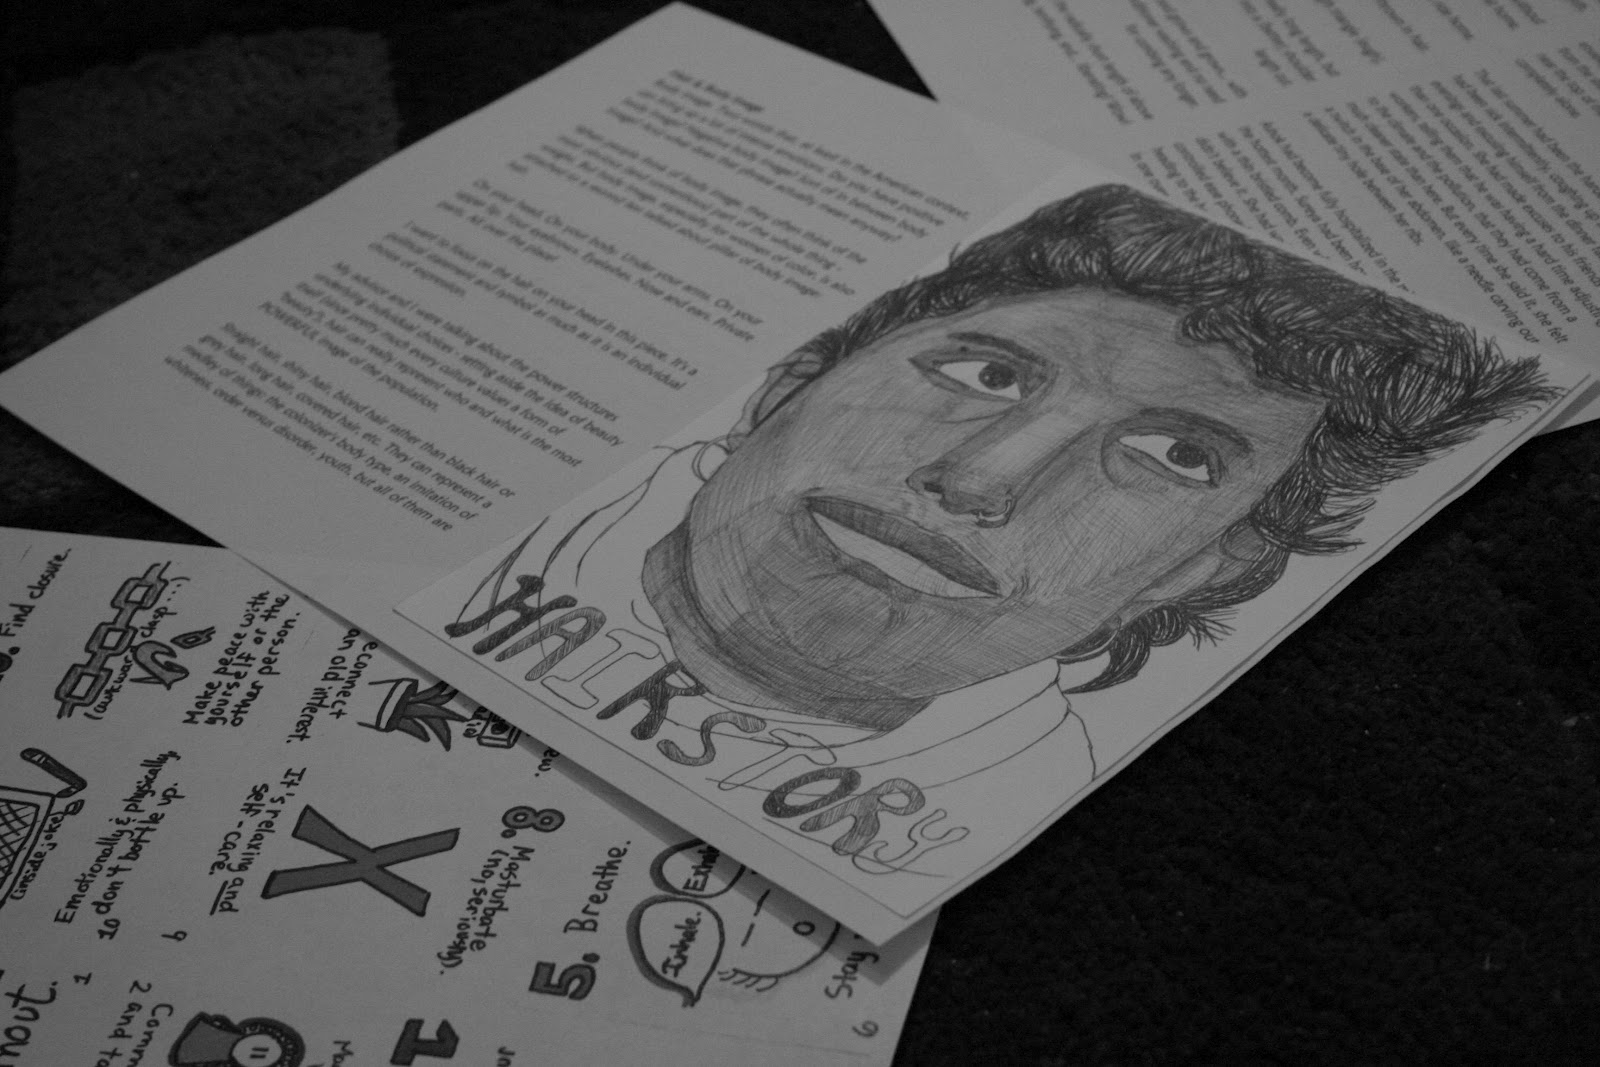 photo of zine in layout form: text on back cover, self portrait of the creator on the front cover